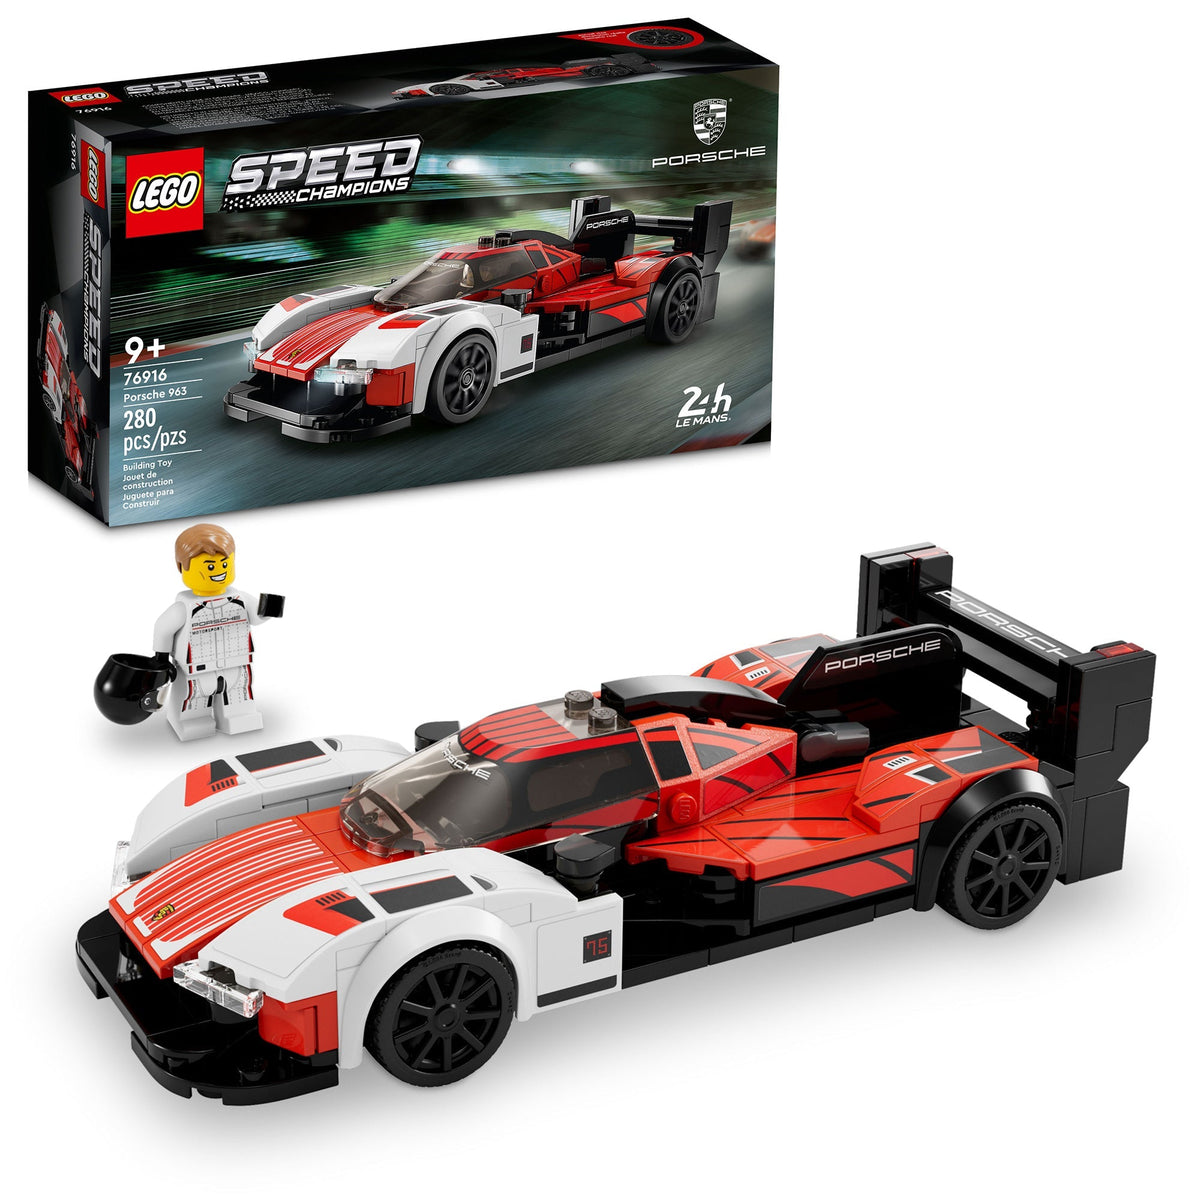 LEGO Toys & Games LEGO Speed Champions Porsche 963, 76916, Ages 9+, 280 Pieces 673419378659